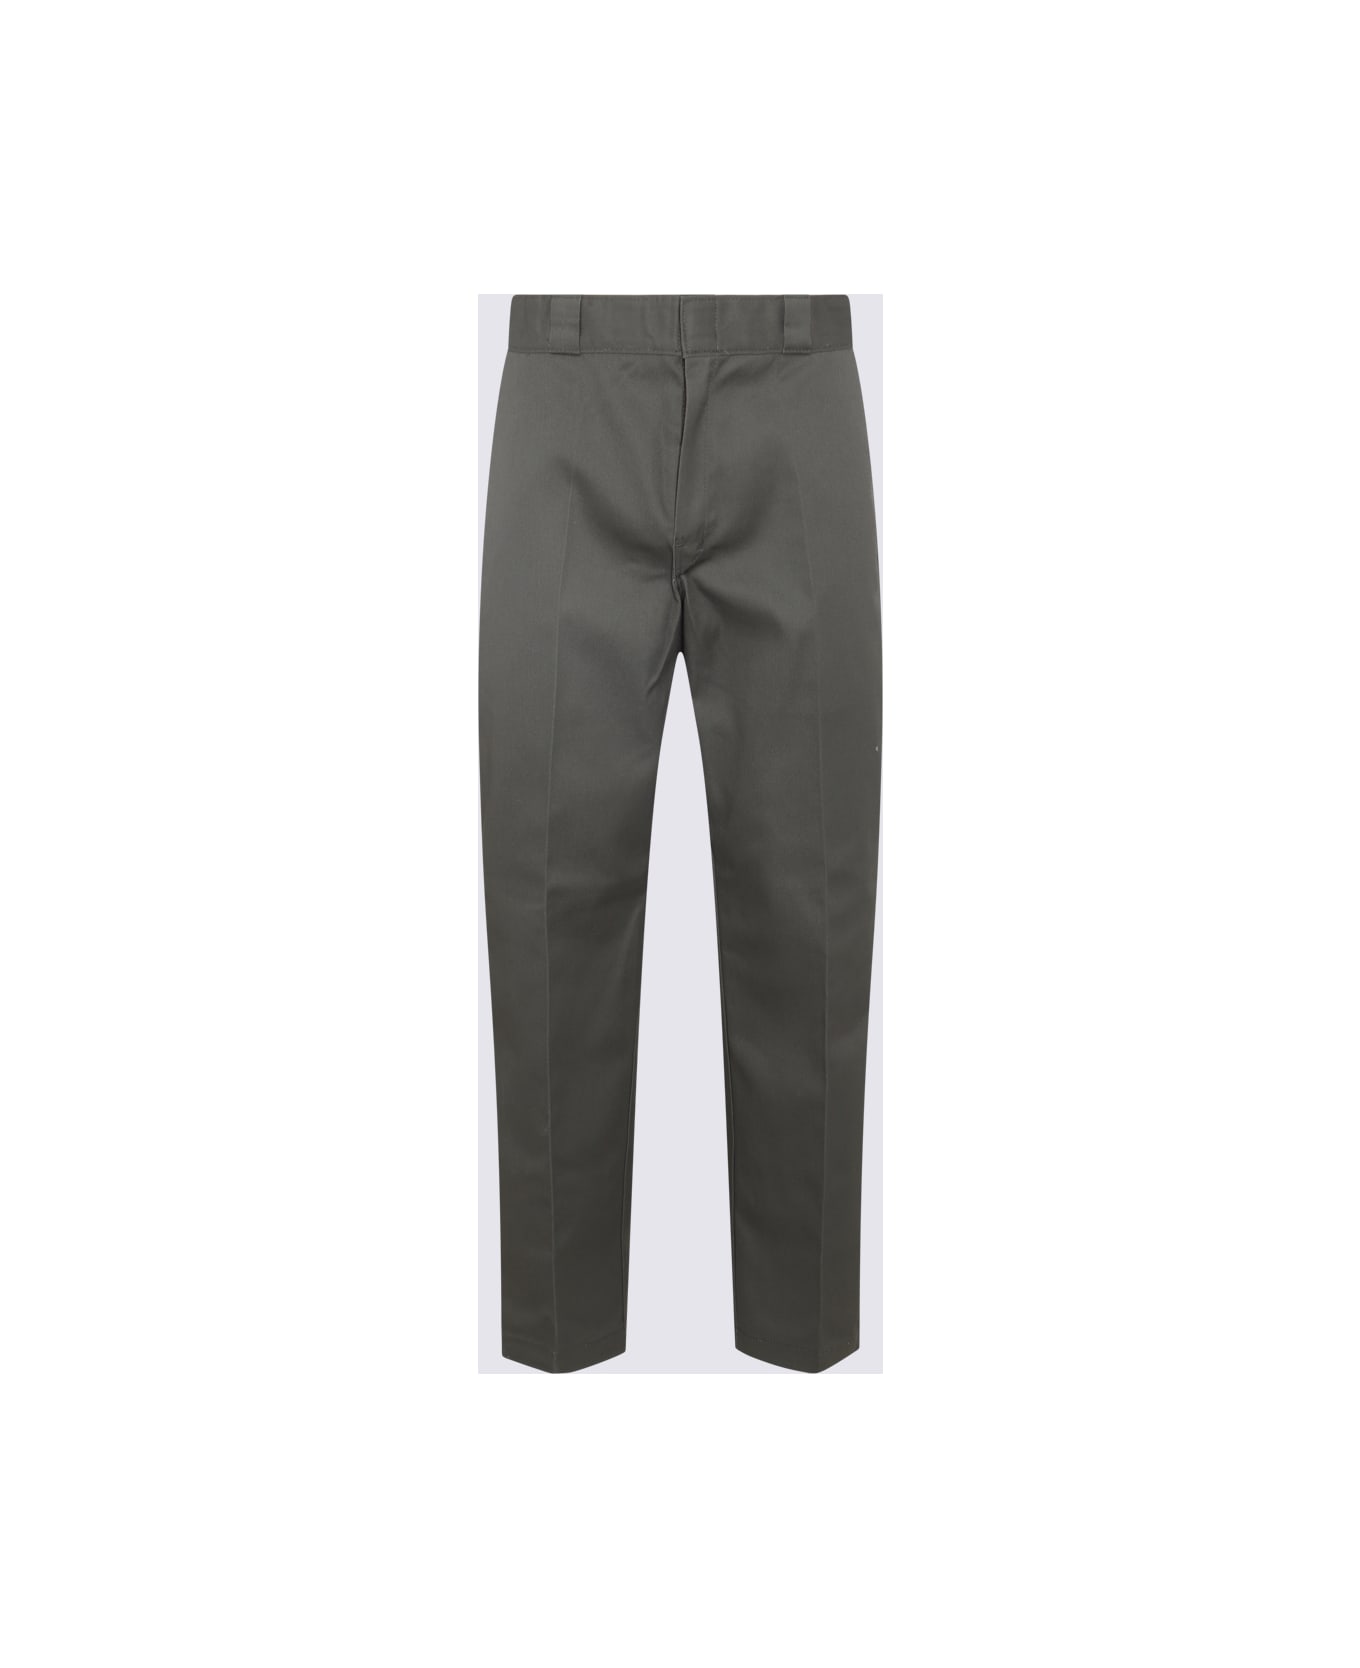 Dickies Olive Cotton Blend Pants